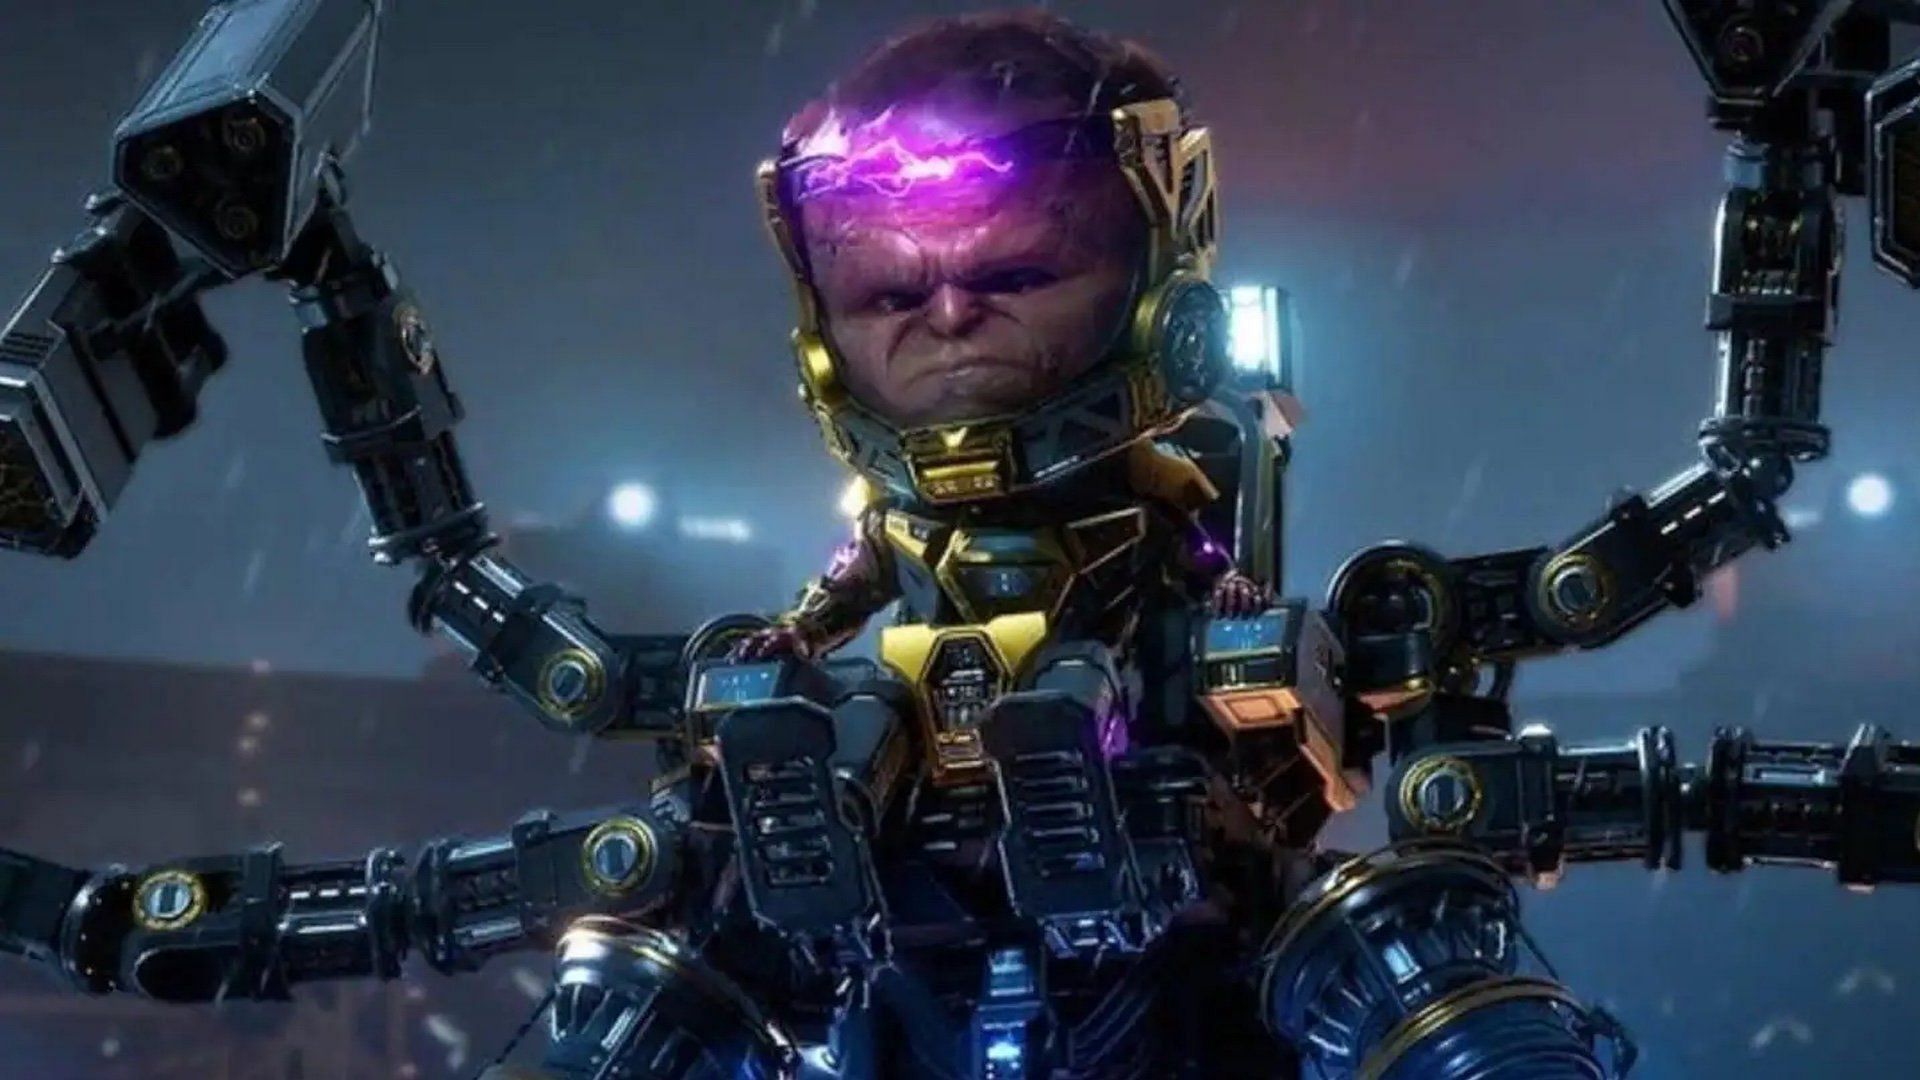 M.O.D.O.K in the Avengers video game (image via Marvel/Square Enix)